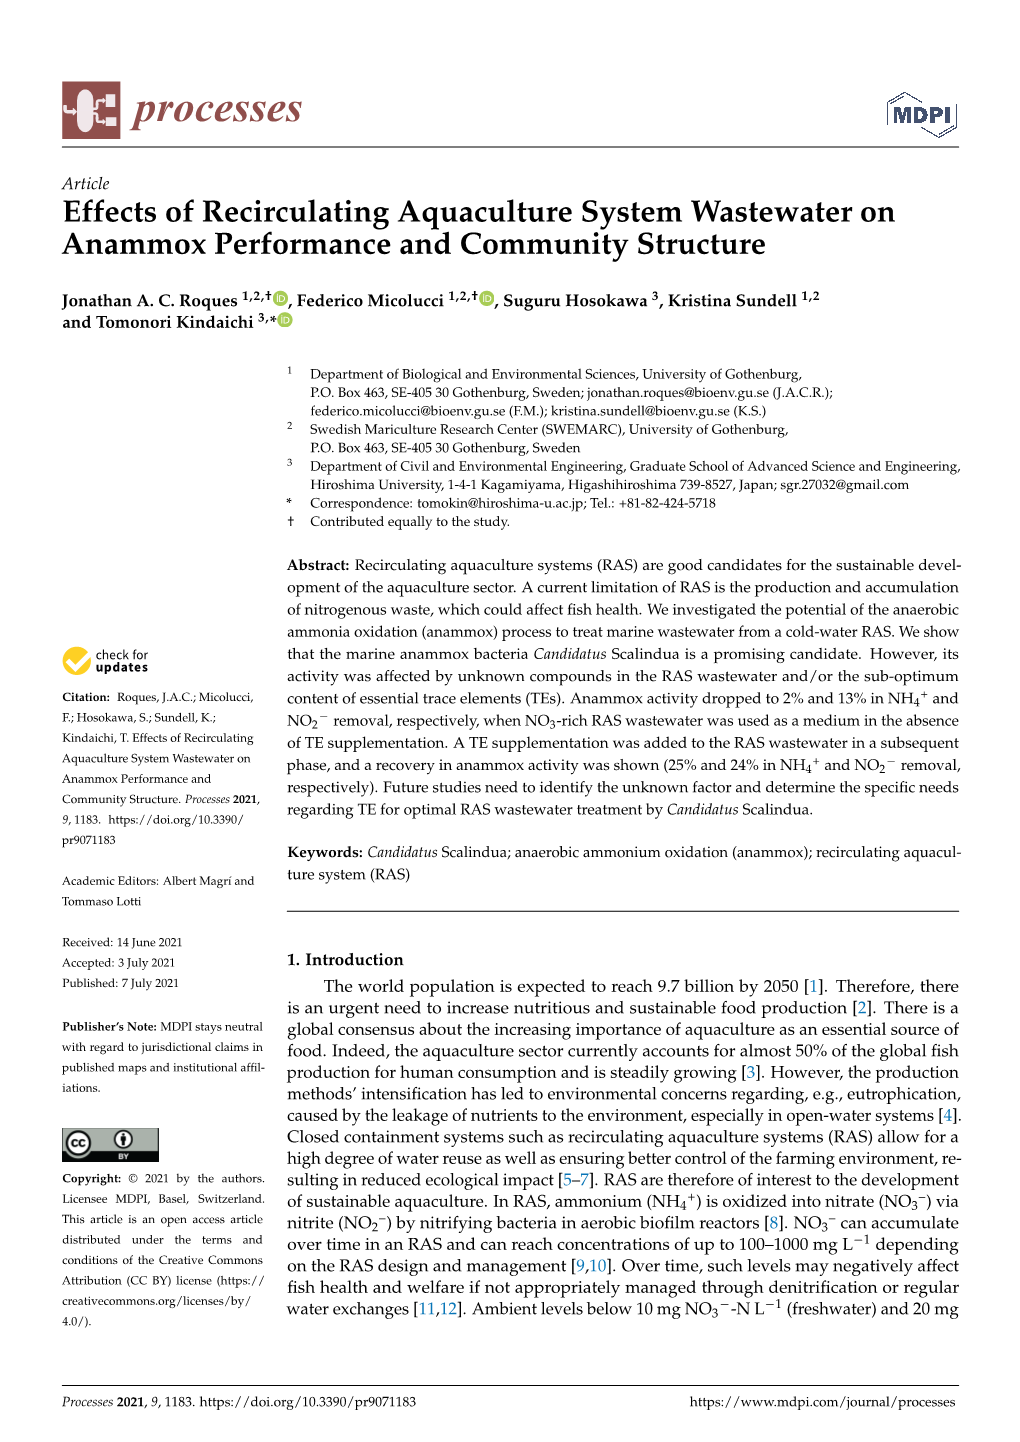 Effects of Recirculating Aquaculture System Wastewater on Anammox Performance and Community Structure